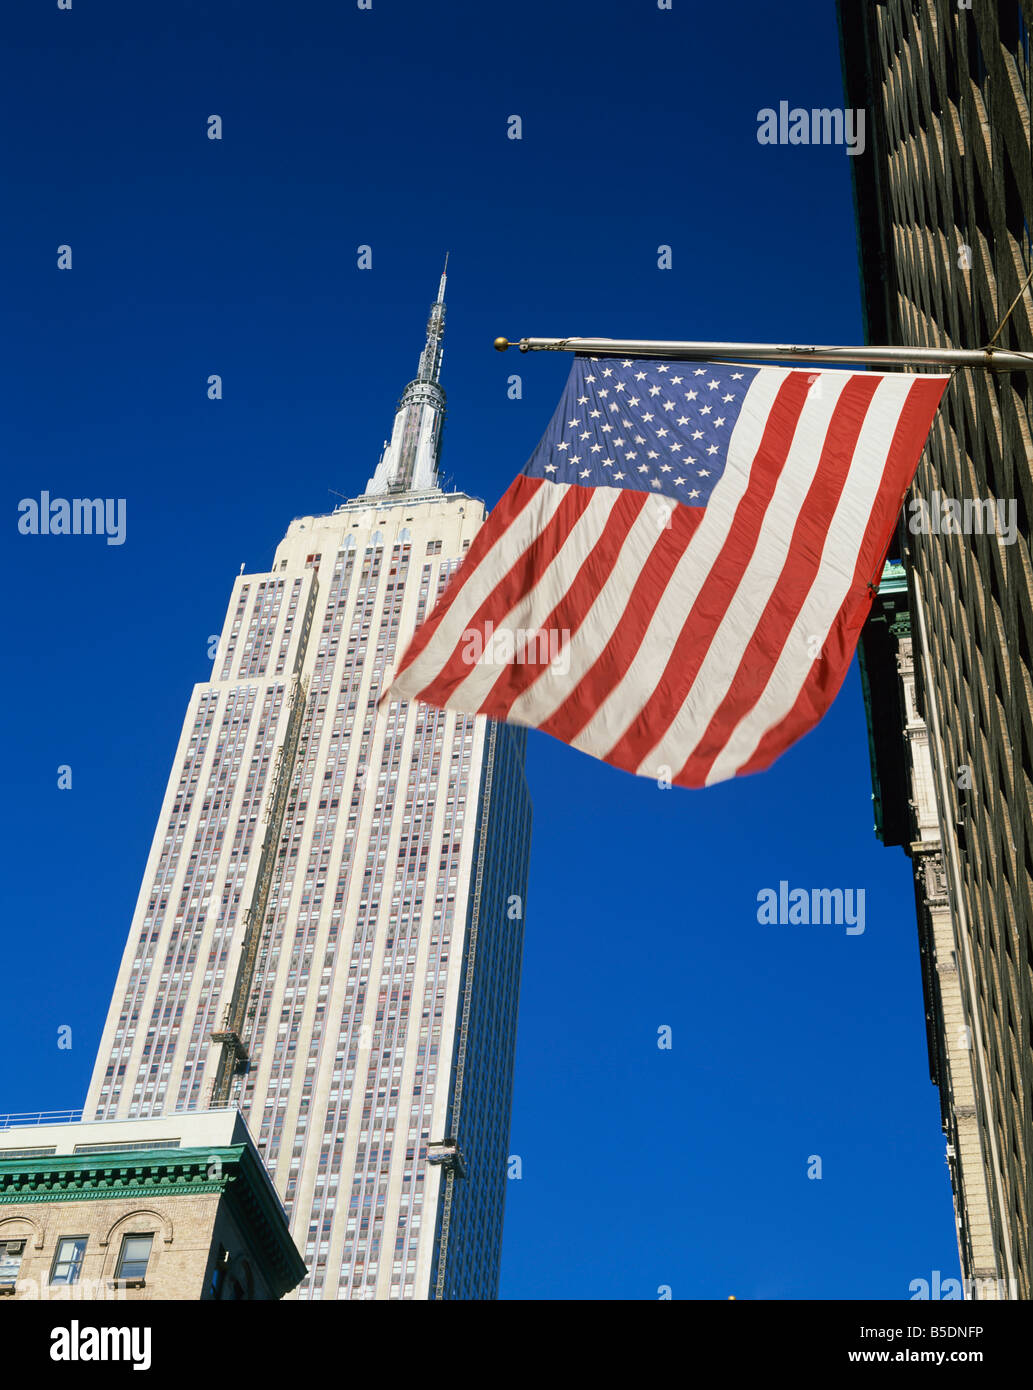 The American flag, the stars and stripes in front of the Empire State Building in New York, USA Stock Photo